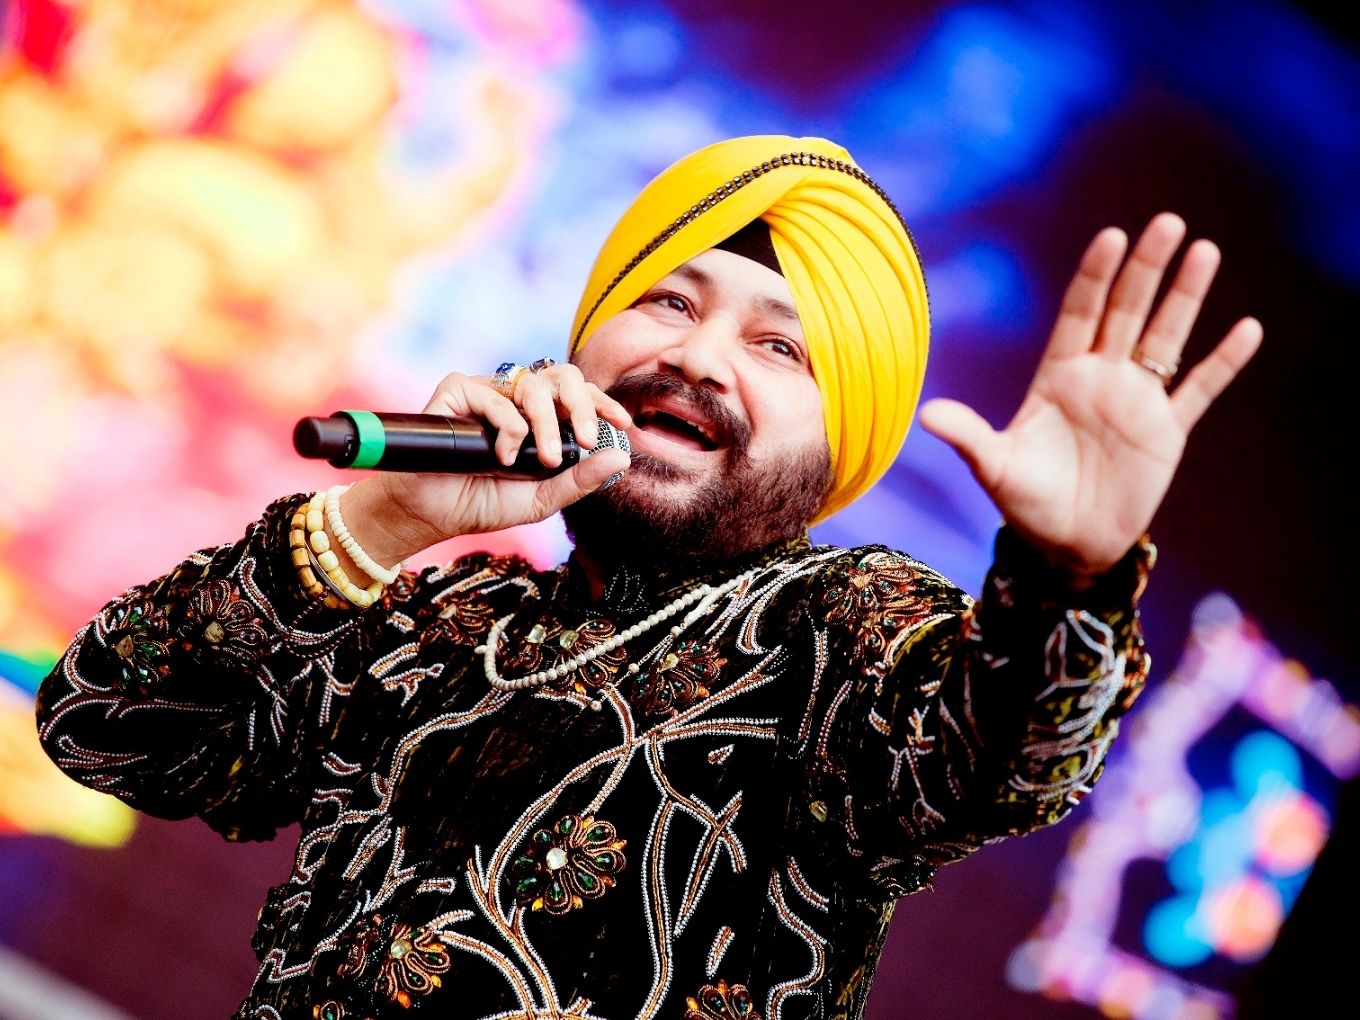 From Daler Mehndi Concerts To Hogwarts Themed Weddings - India Braces For The Metaverse Summary Daler Mehndi, famous for his hit track Tunak Tunak, is set to host a Republic Day concert on the PartyNite metaverse from Gamitronics NBA team Brooklyn Nets debuted a new cutting-edge video system that creates a three-dimensional lifelike render of the game Dinesh S P and Janaganandhini Ramaswamy will get married to each other in the village of Sivalingapuram with a Harry Potter-themed wedding reception happening in the ‘TardiVerse’, on Polygon What does a Daler Mehndi concert, a wedding in Tamil Nadu and the NBA team Brooklyn Nets have in common? You will soon be able to catch them all in the metaverse.